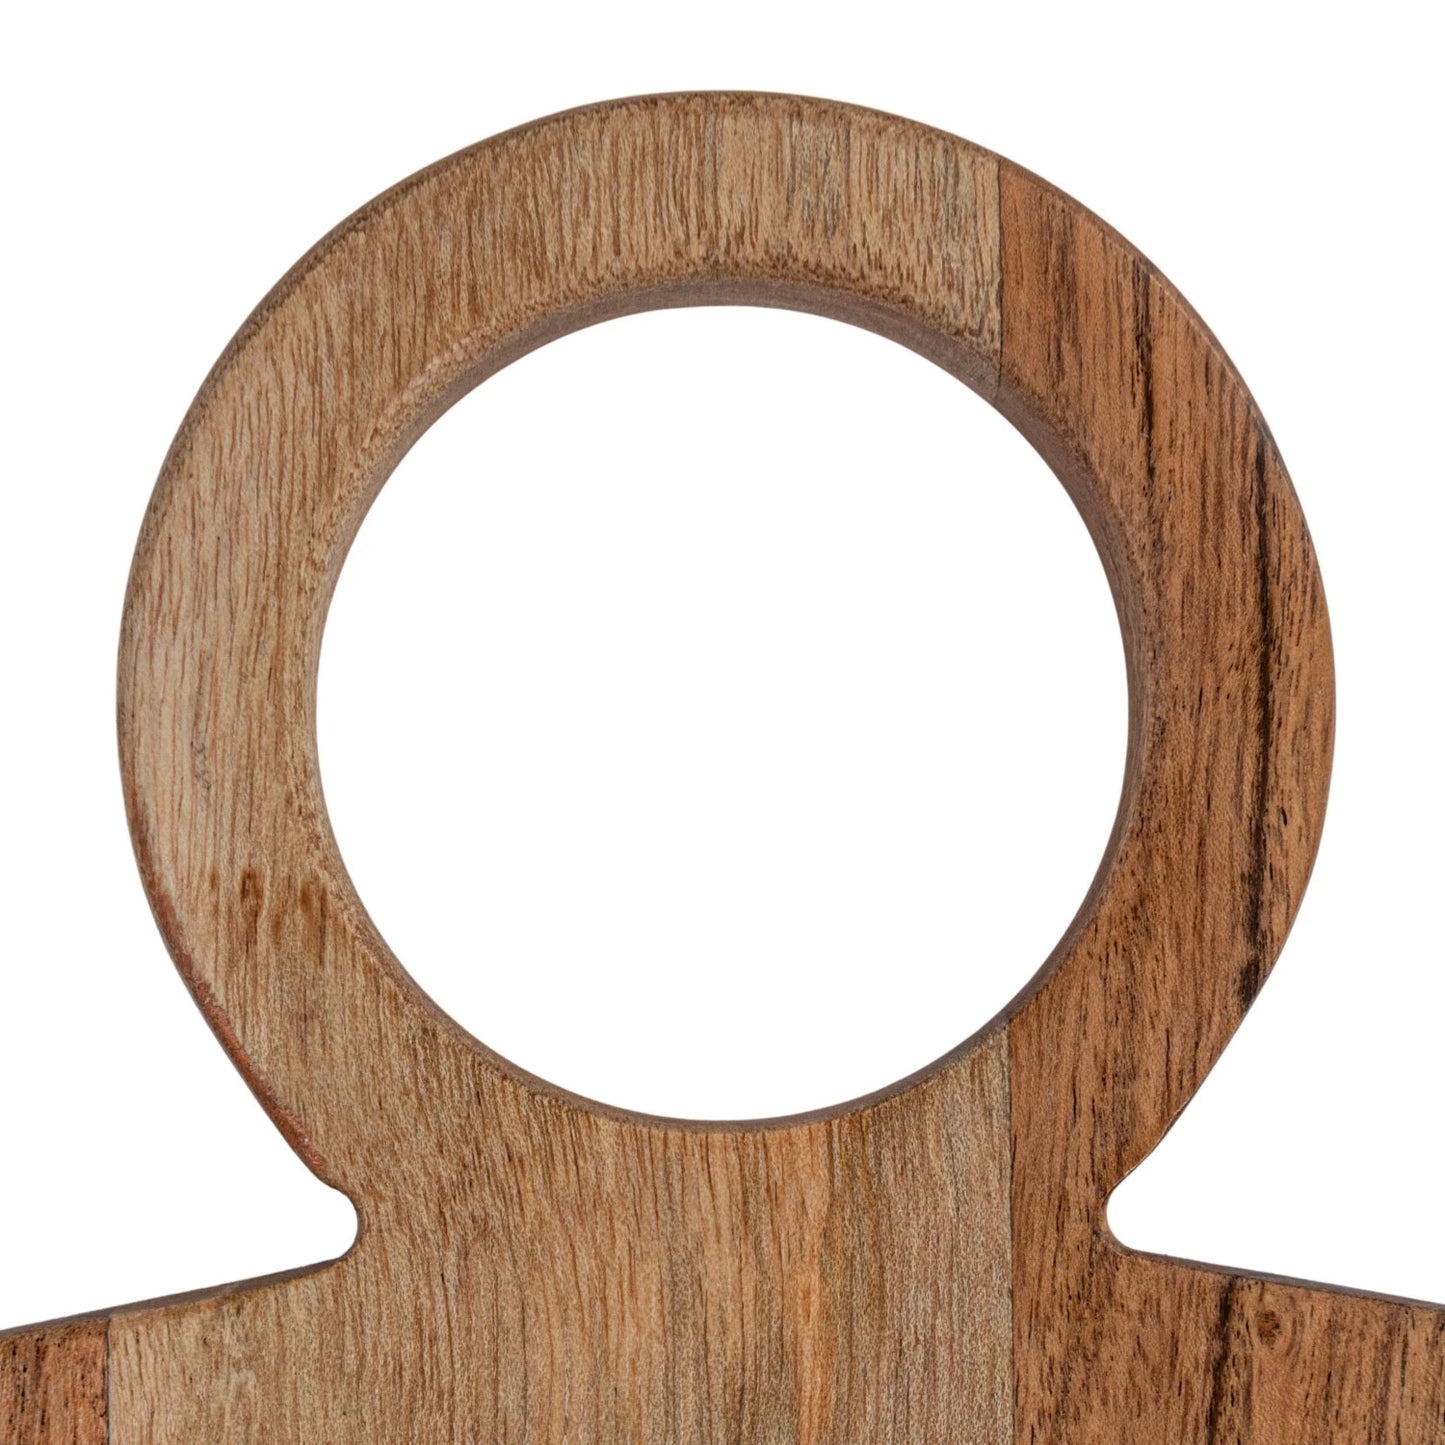 Acacia Wood CheeseCutting Board with Round Handle